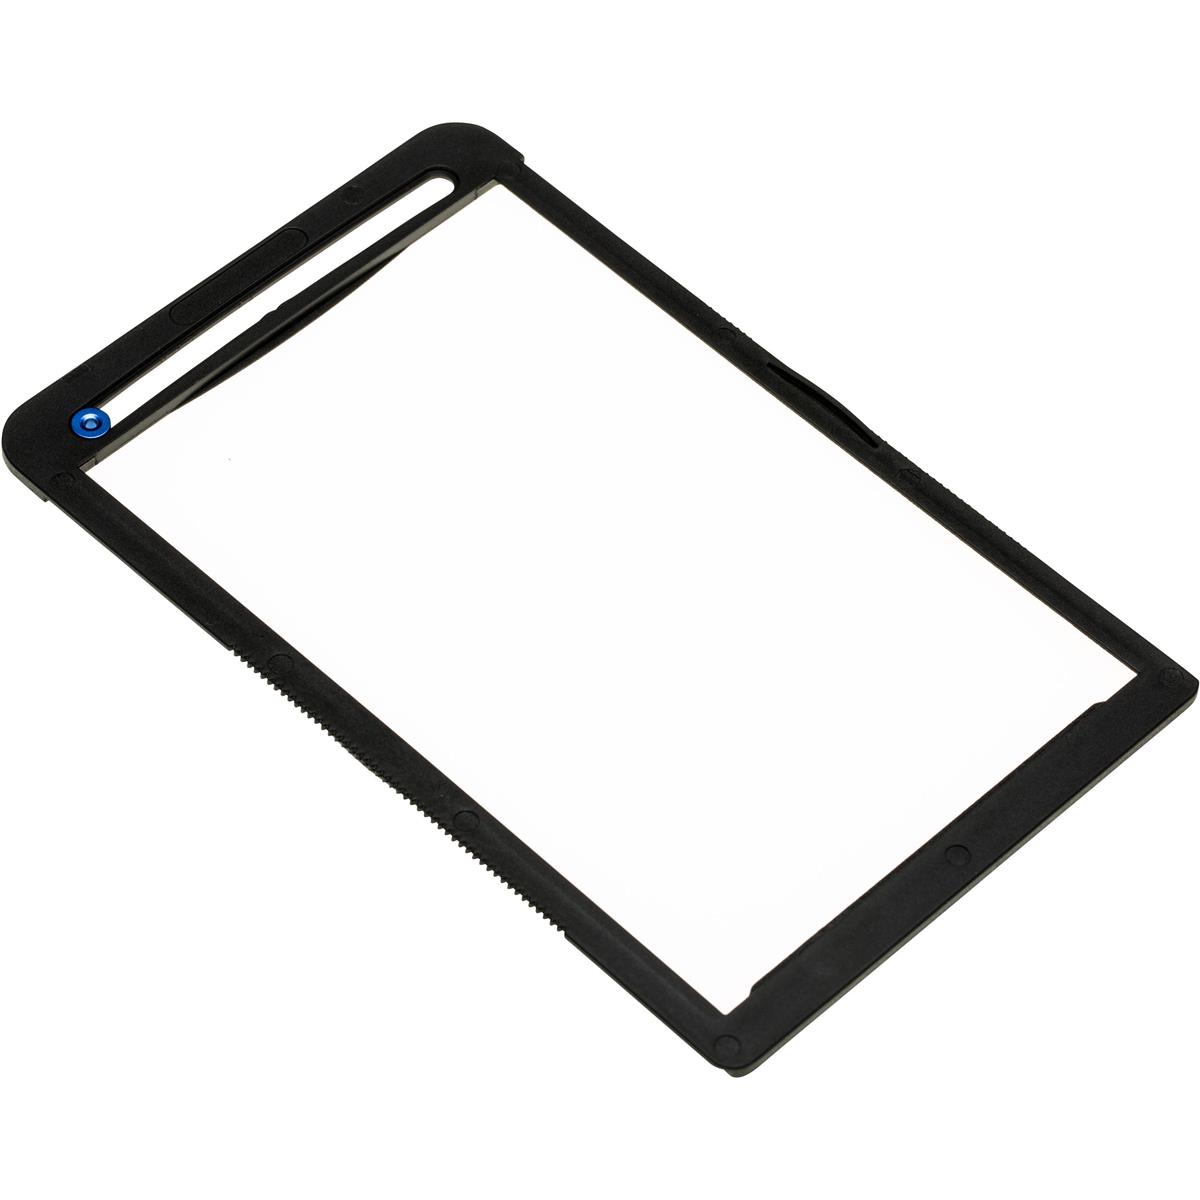 Photos - Other photo accessories Benro Filter Frame 100x150x2mm for FH100 FR1015 